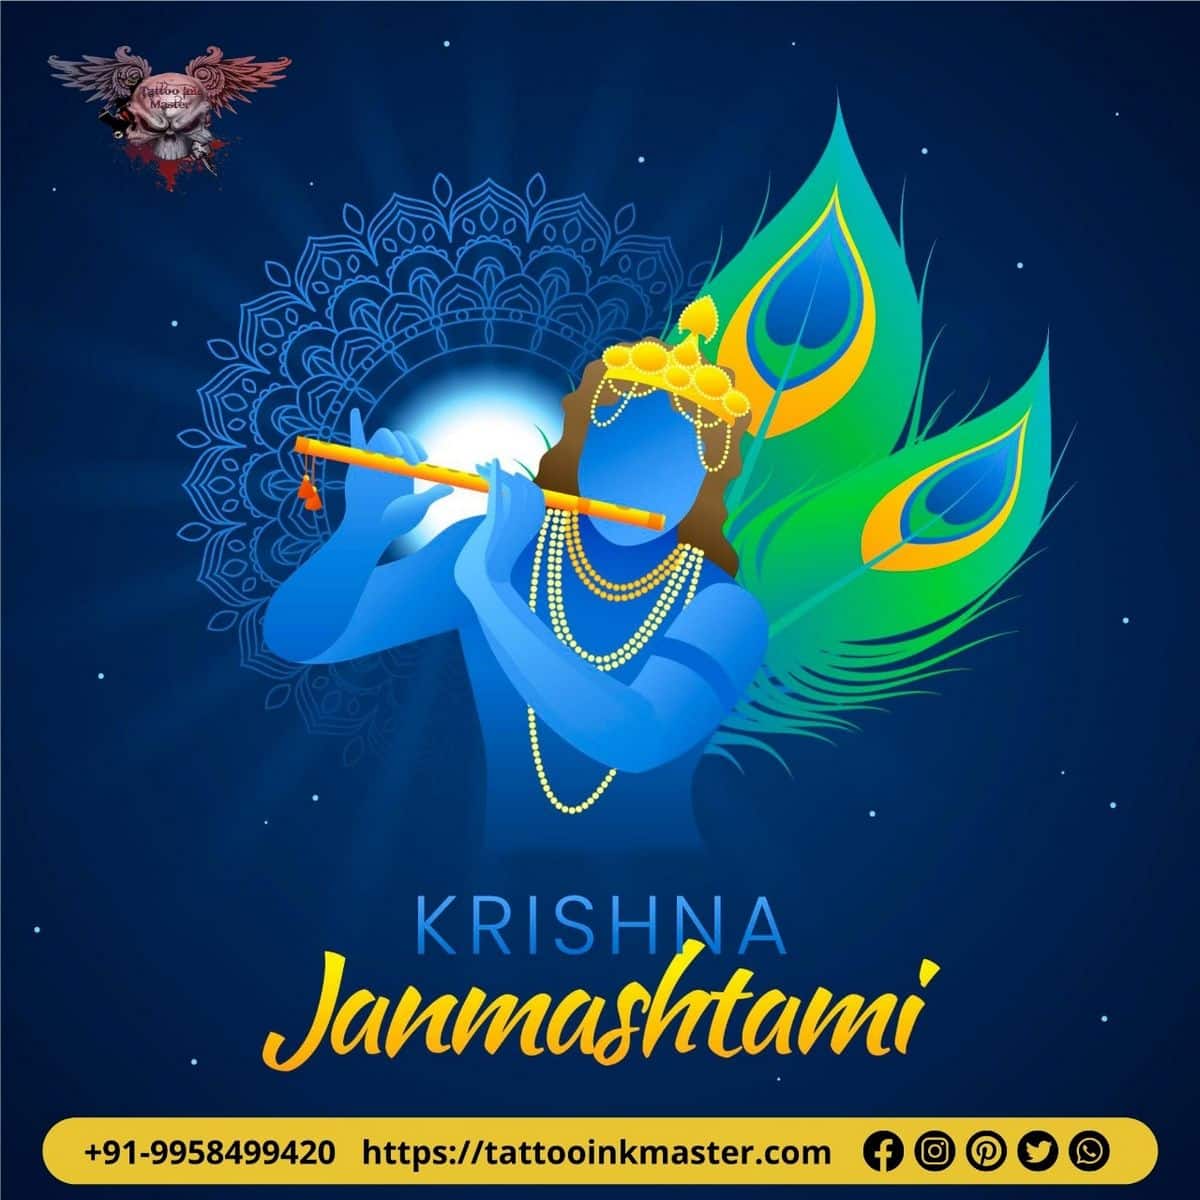 You are currently viewing Wishing You All A Very Happy Krishna Janmasthami from Tattooinkmaster